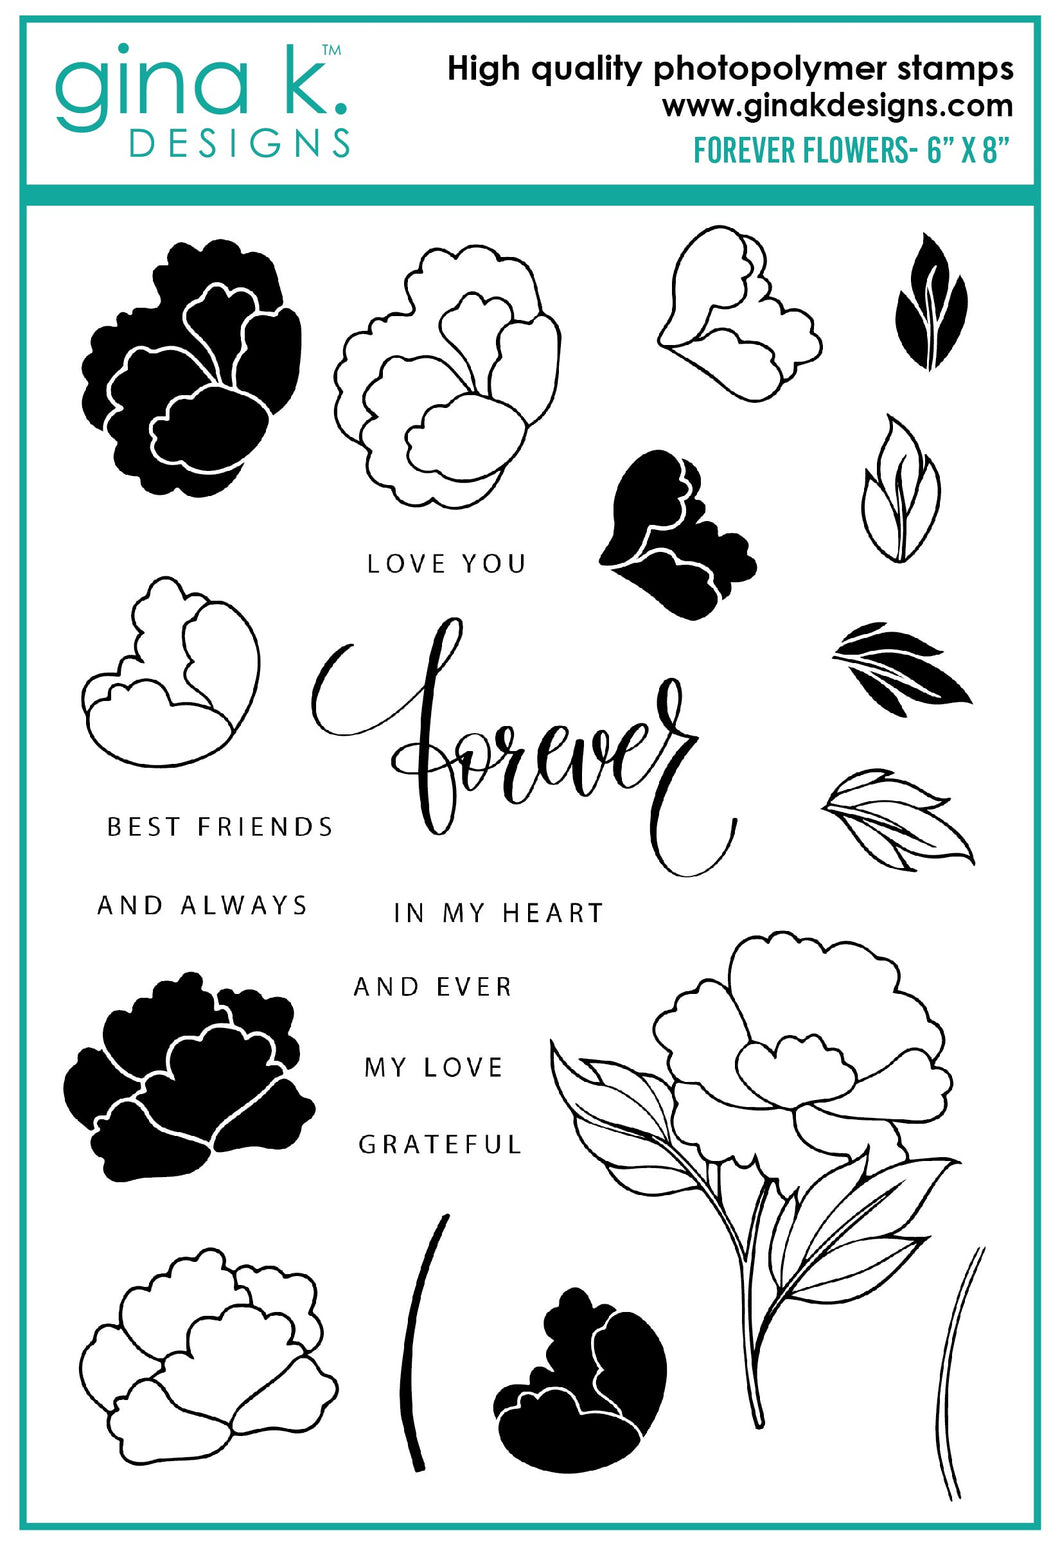 Gina K. Designs - Stamps - Forever Flowers. Forever Flowers is a stamp set by artist Alicia Krupsky. This set is made of premium clear photopolymer and measures 6